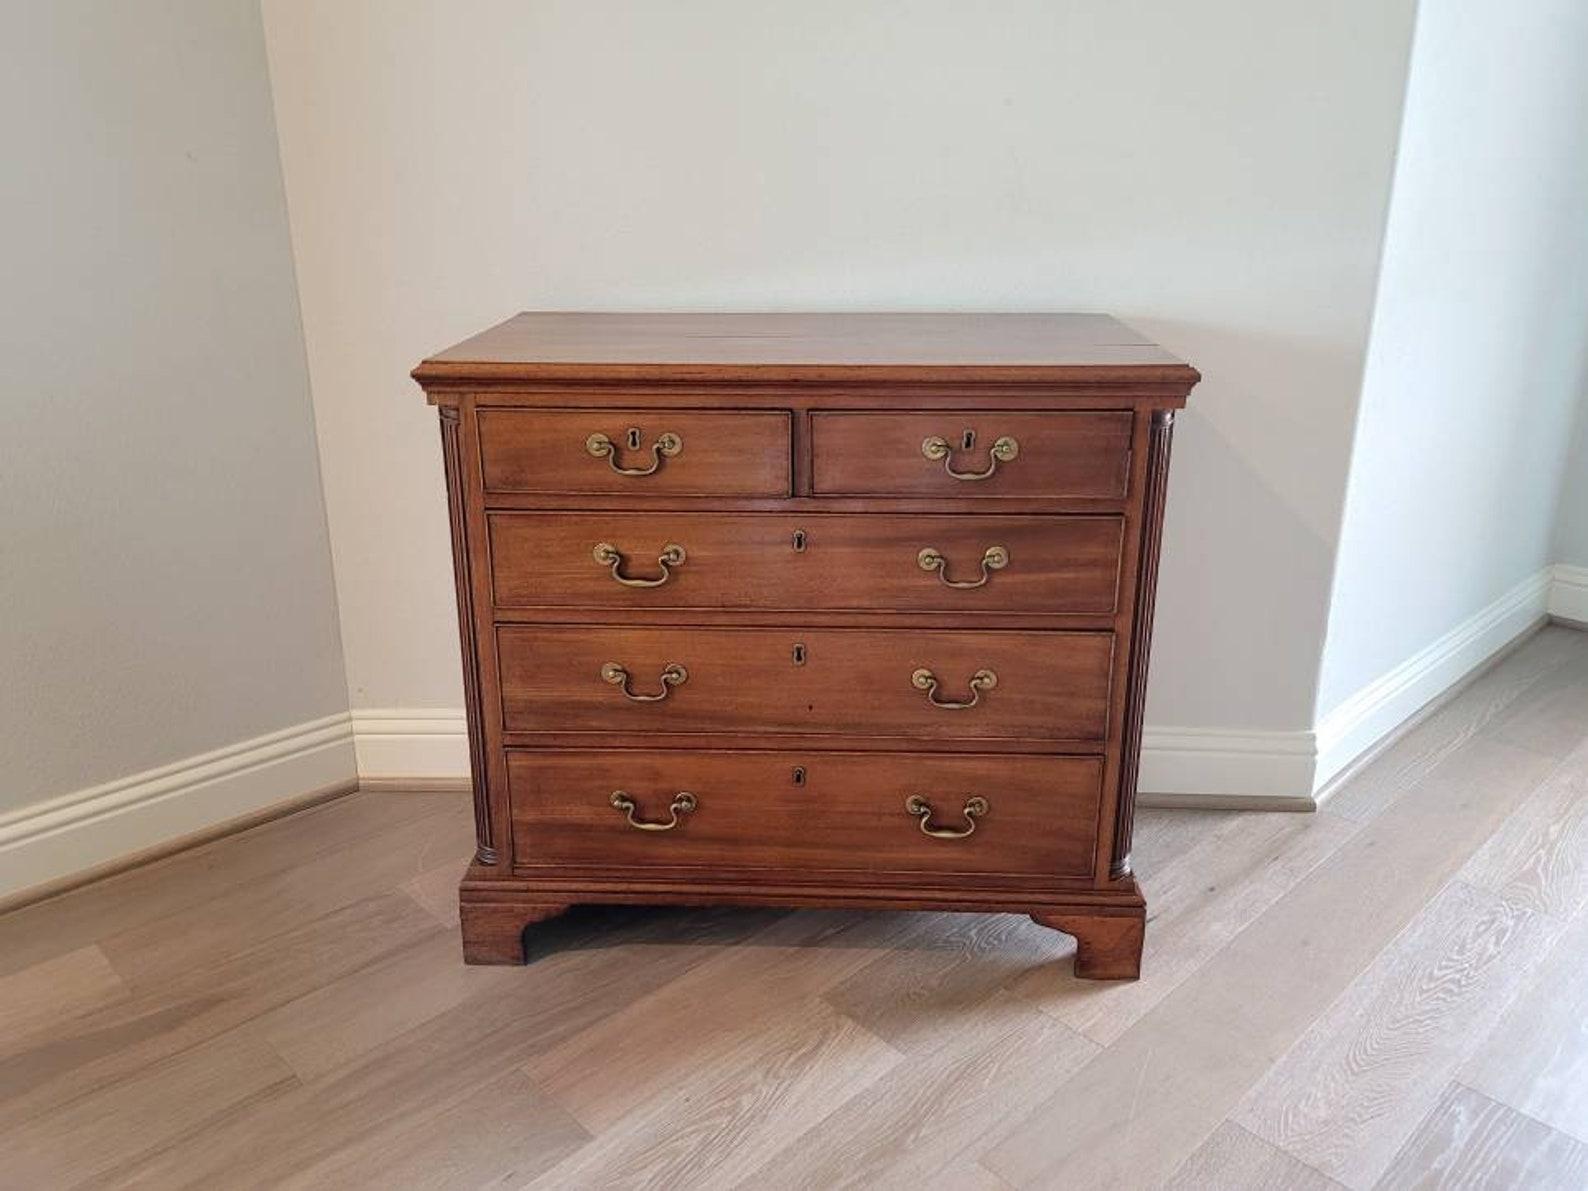 An exceptional quality American Federal Style Bachelor's chest of five drawers from the first half of the 19th century.

Finely hand-crafted of warm rich solid mahogany, having a rectangular top with applied molded edge, loss to one piece of trim